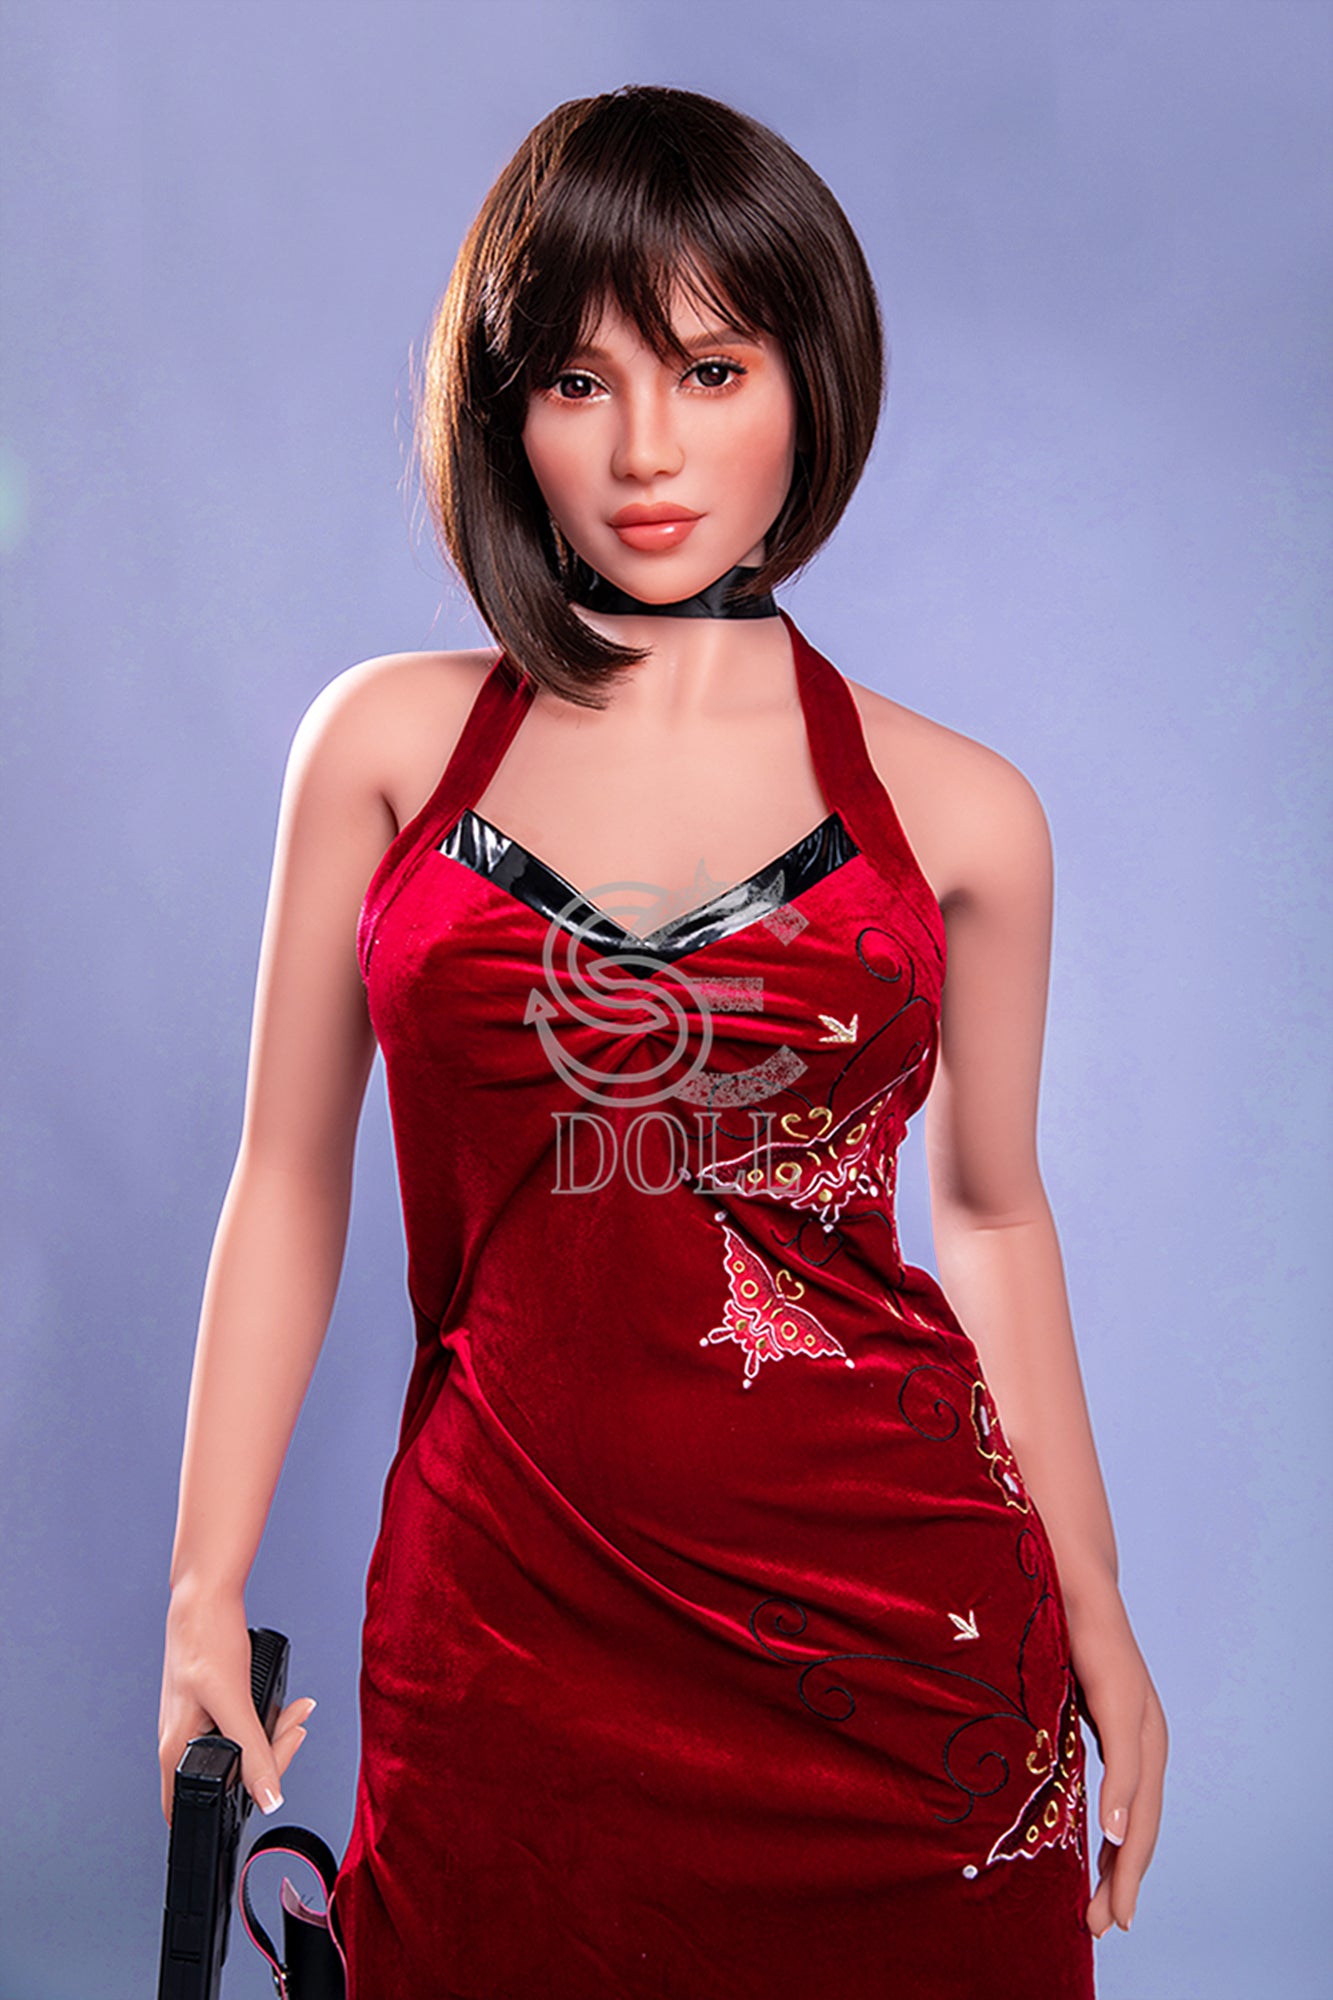 SEDOLL 163 cm E TPE - Nidalee | Buy Sex Dolls at DOLLS ACTUALLY